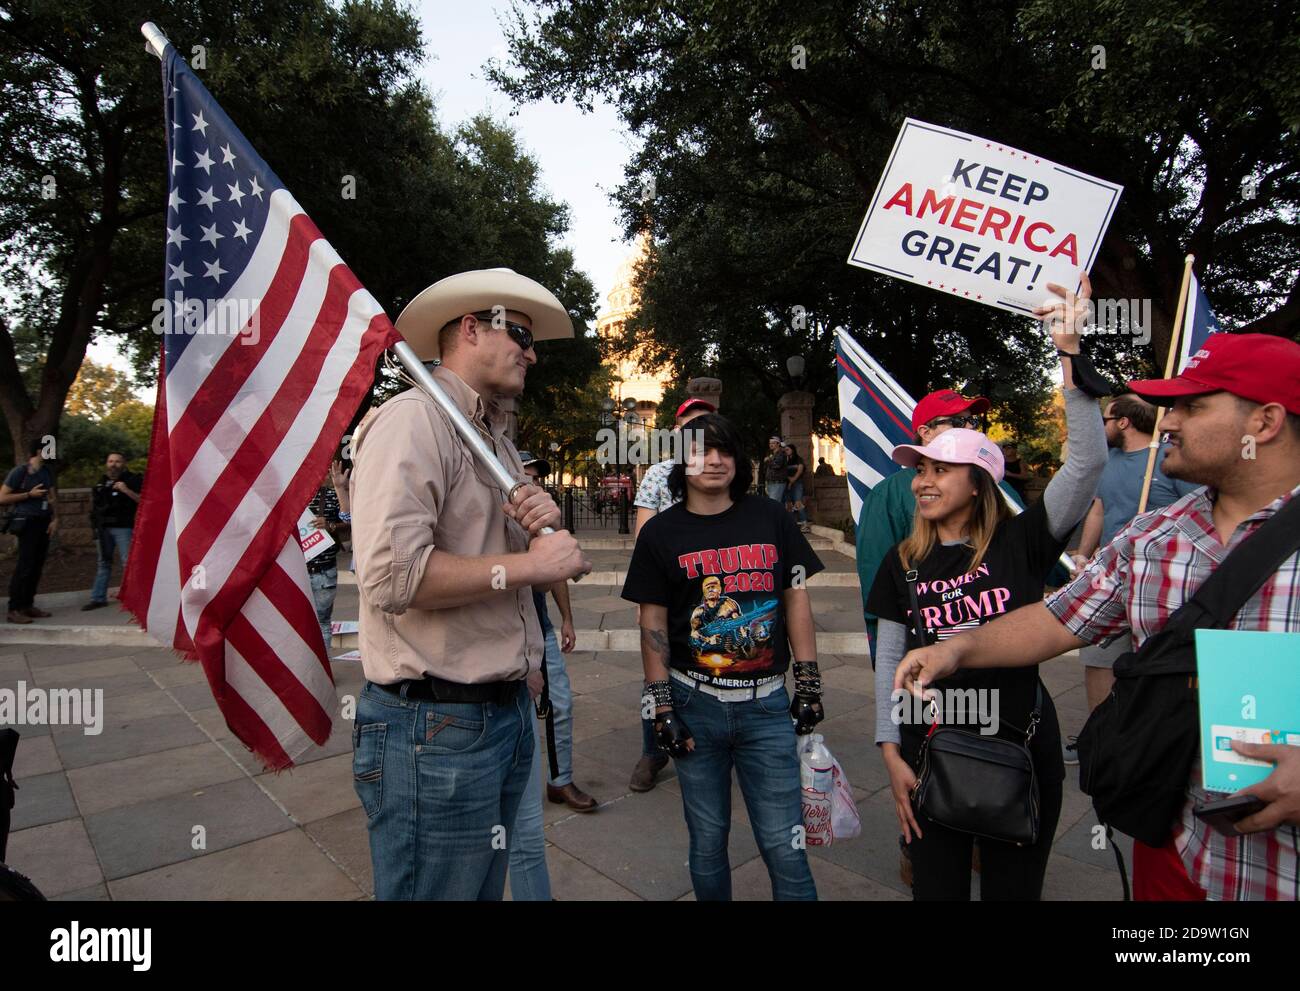 Austin, Texas, USA. 07th Nov, 2020. Pro-Trump supporters rally at the Texas Capitol where Austin police and Texas troopers tried to keep Biden and Trump supporters apart. The protest numbered a few hundred after Biden was declared the winner for President of the US on November 7, 2020. Credit: Bob Daemmrich/Alamy Live News Credit: Bob Daemmrich/Alamy Live News Stock Photo